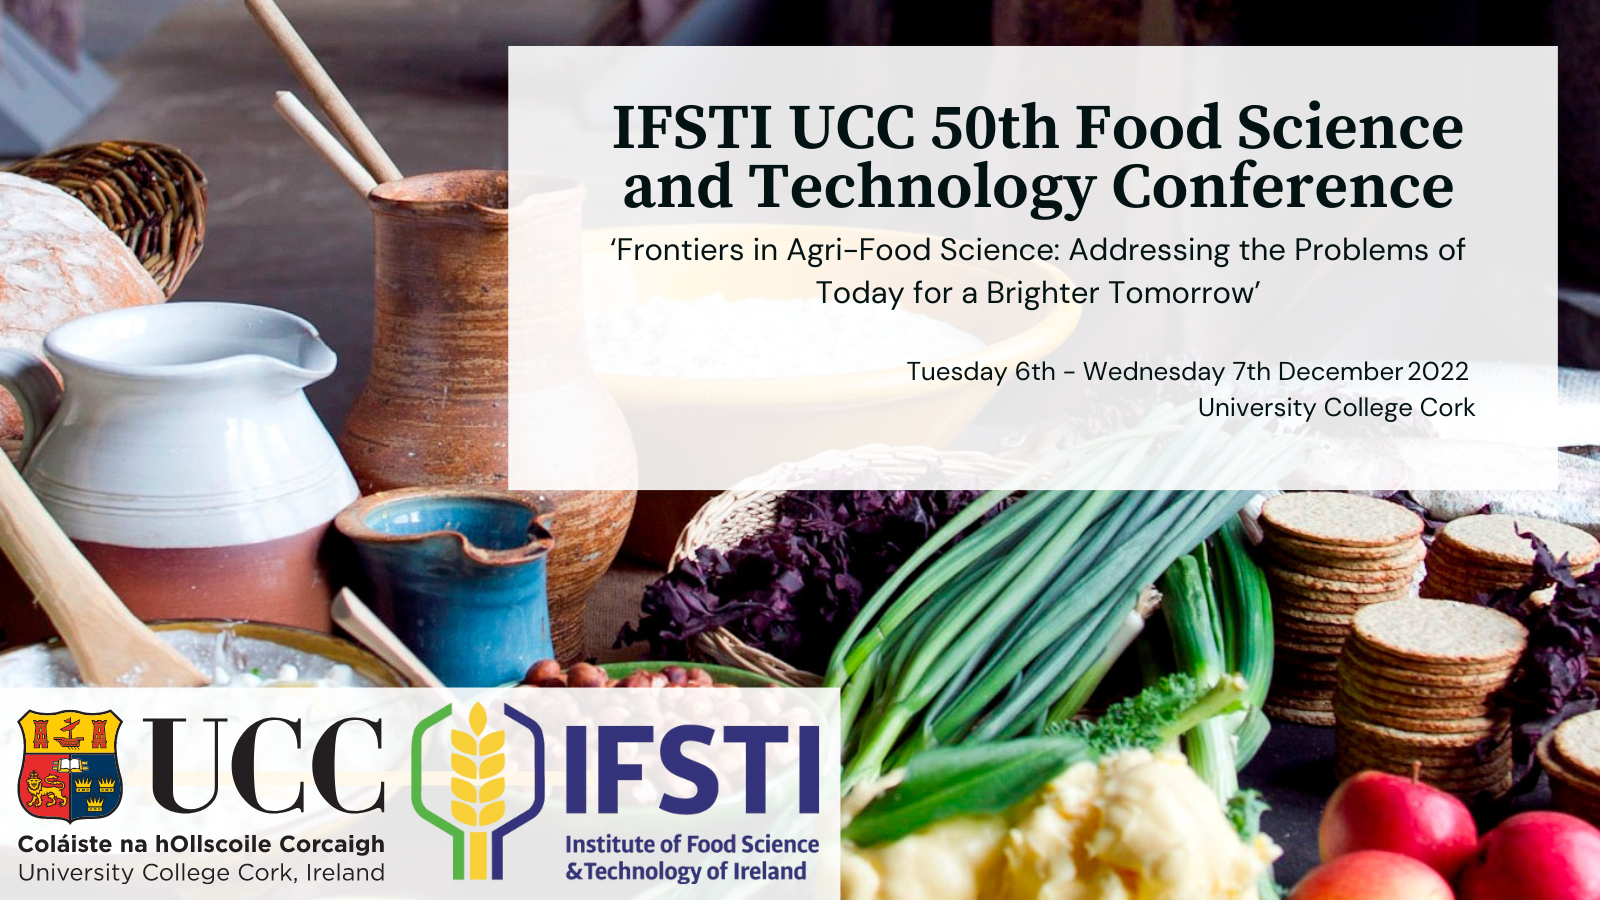 UCC/IFSTI 50th Food Science and Technology Conference ‘Frontiers in Agri-Food Science: Addressing the Problems of Today for a Brighter Tomorrow’
